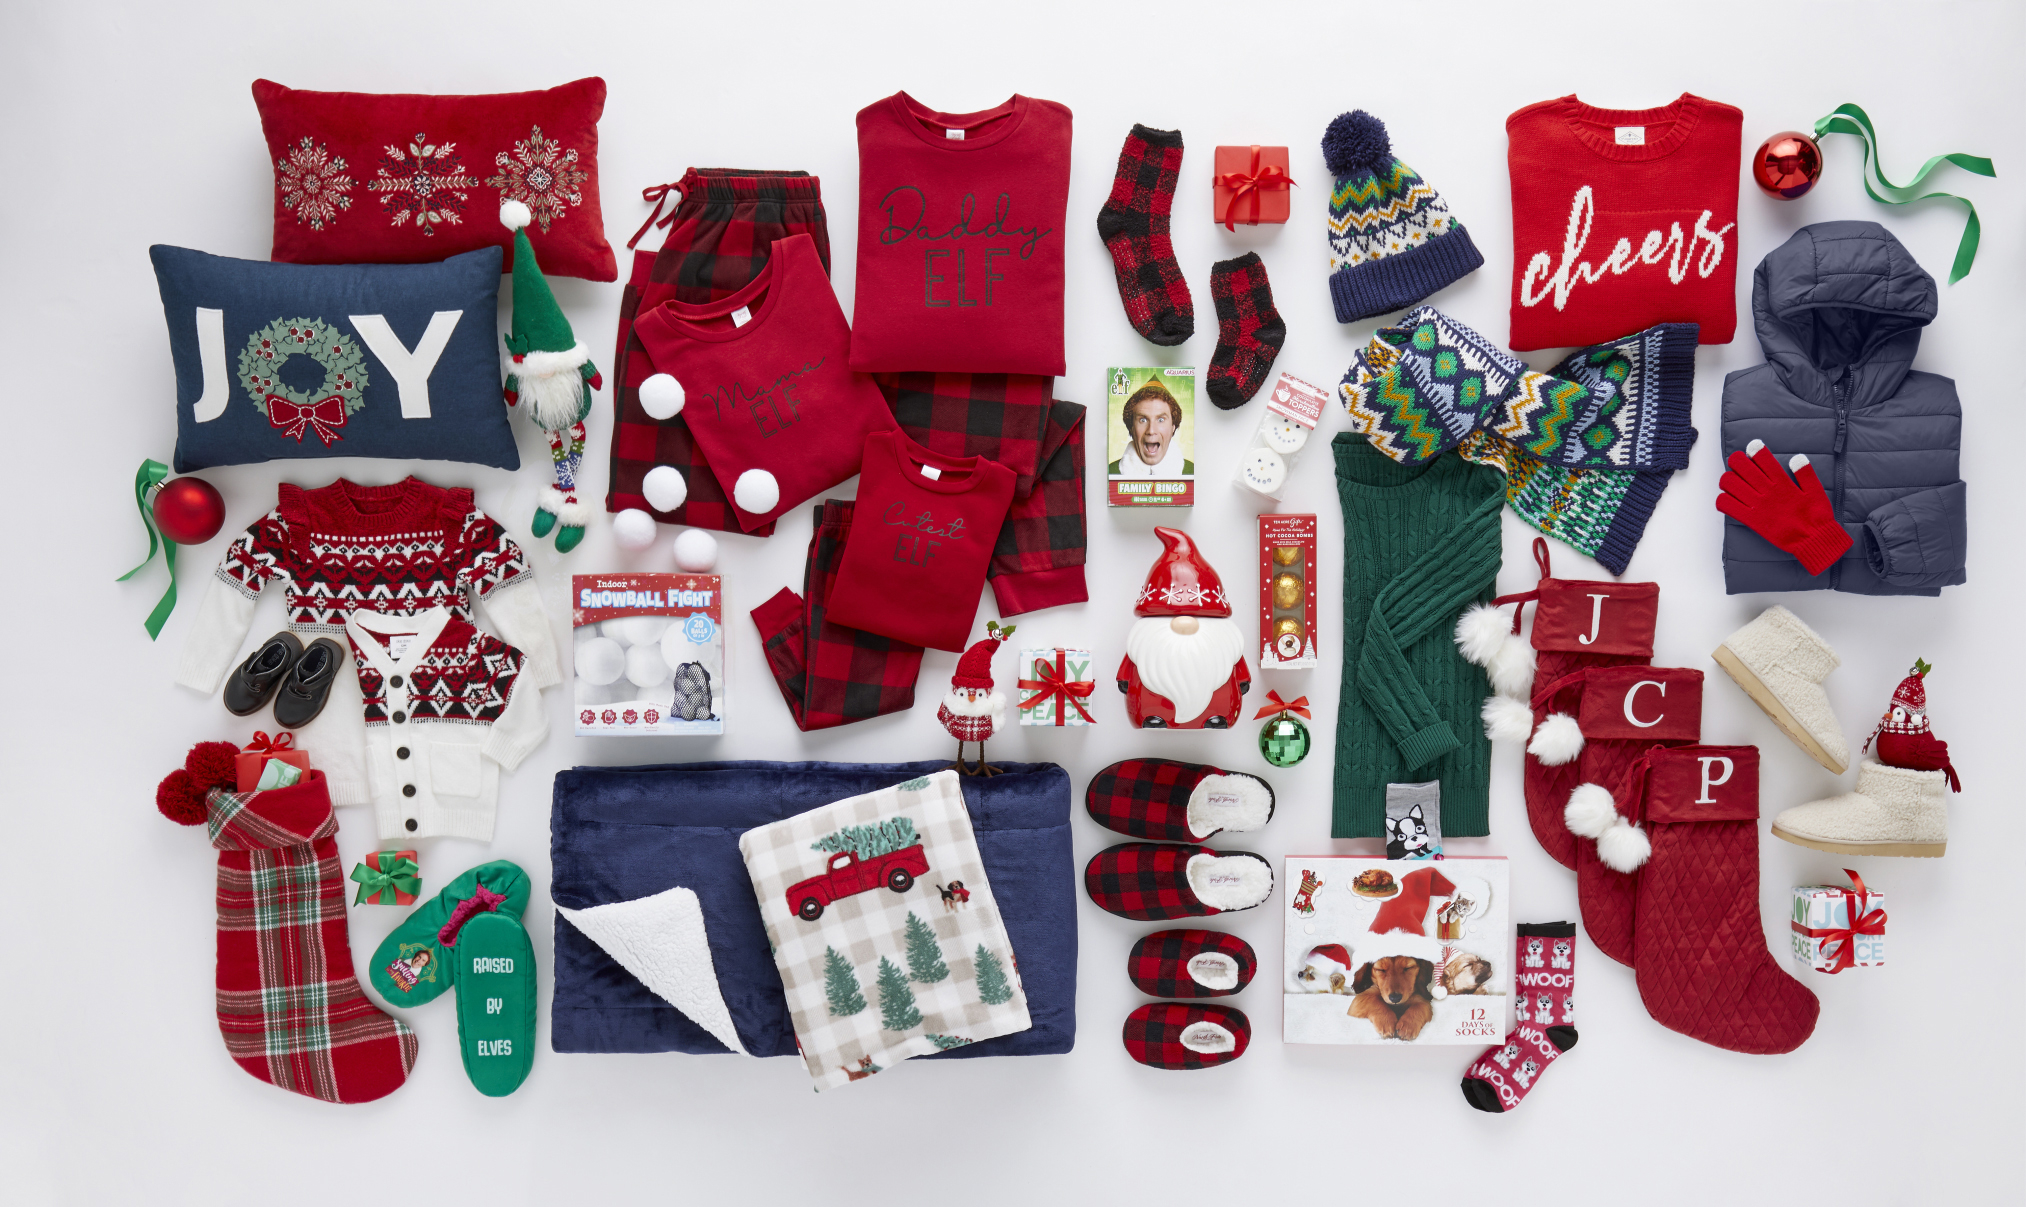 We Got Your Holiday”: JCPenney is Making the Holidays Easier for